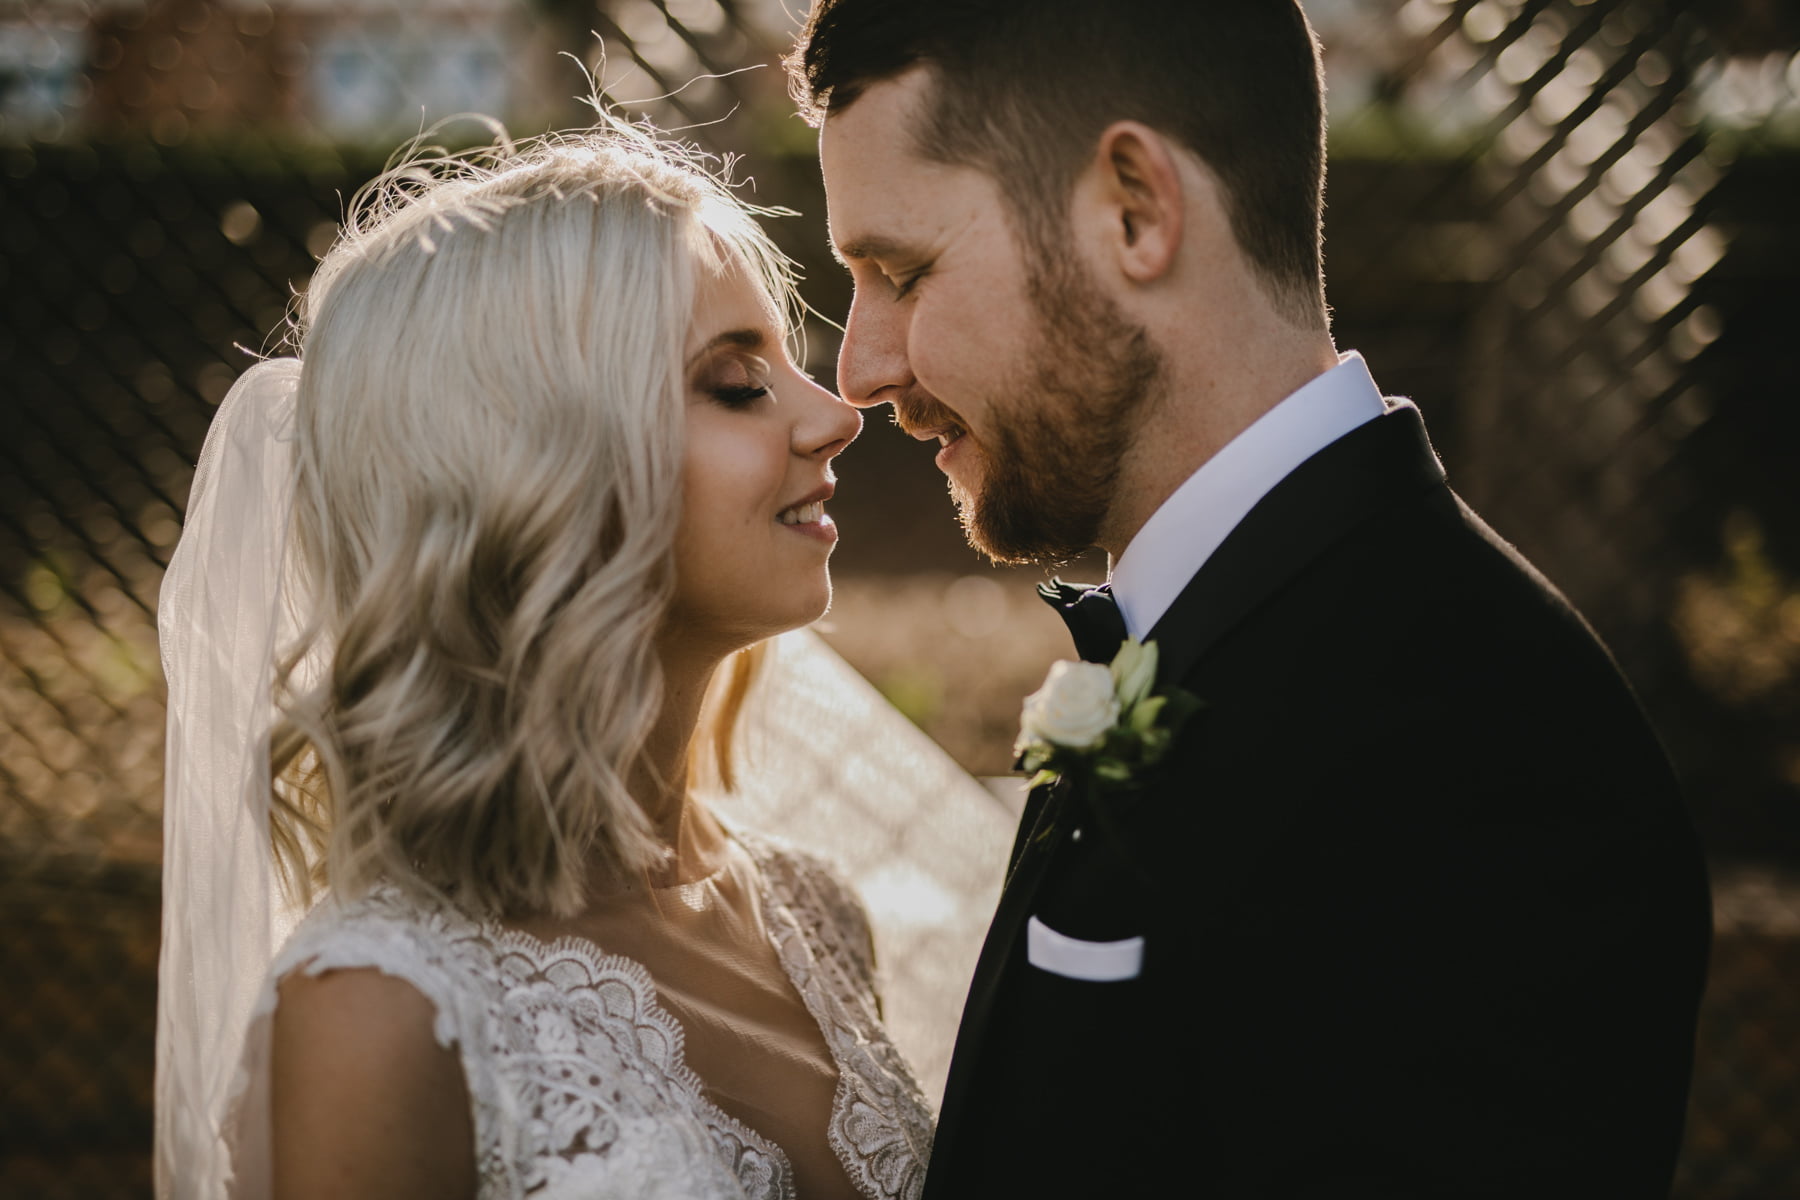 LENSURE has the best professional wedding videographers in Melbourne for excellent videography production to gives you beautifully crafted wedding videos.